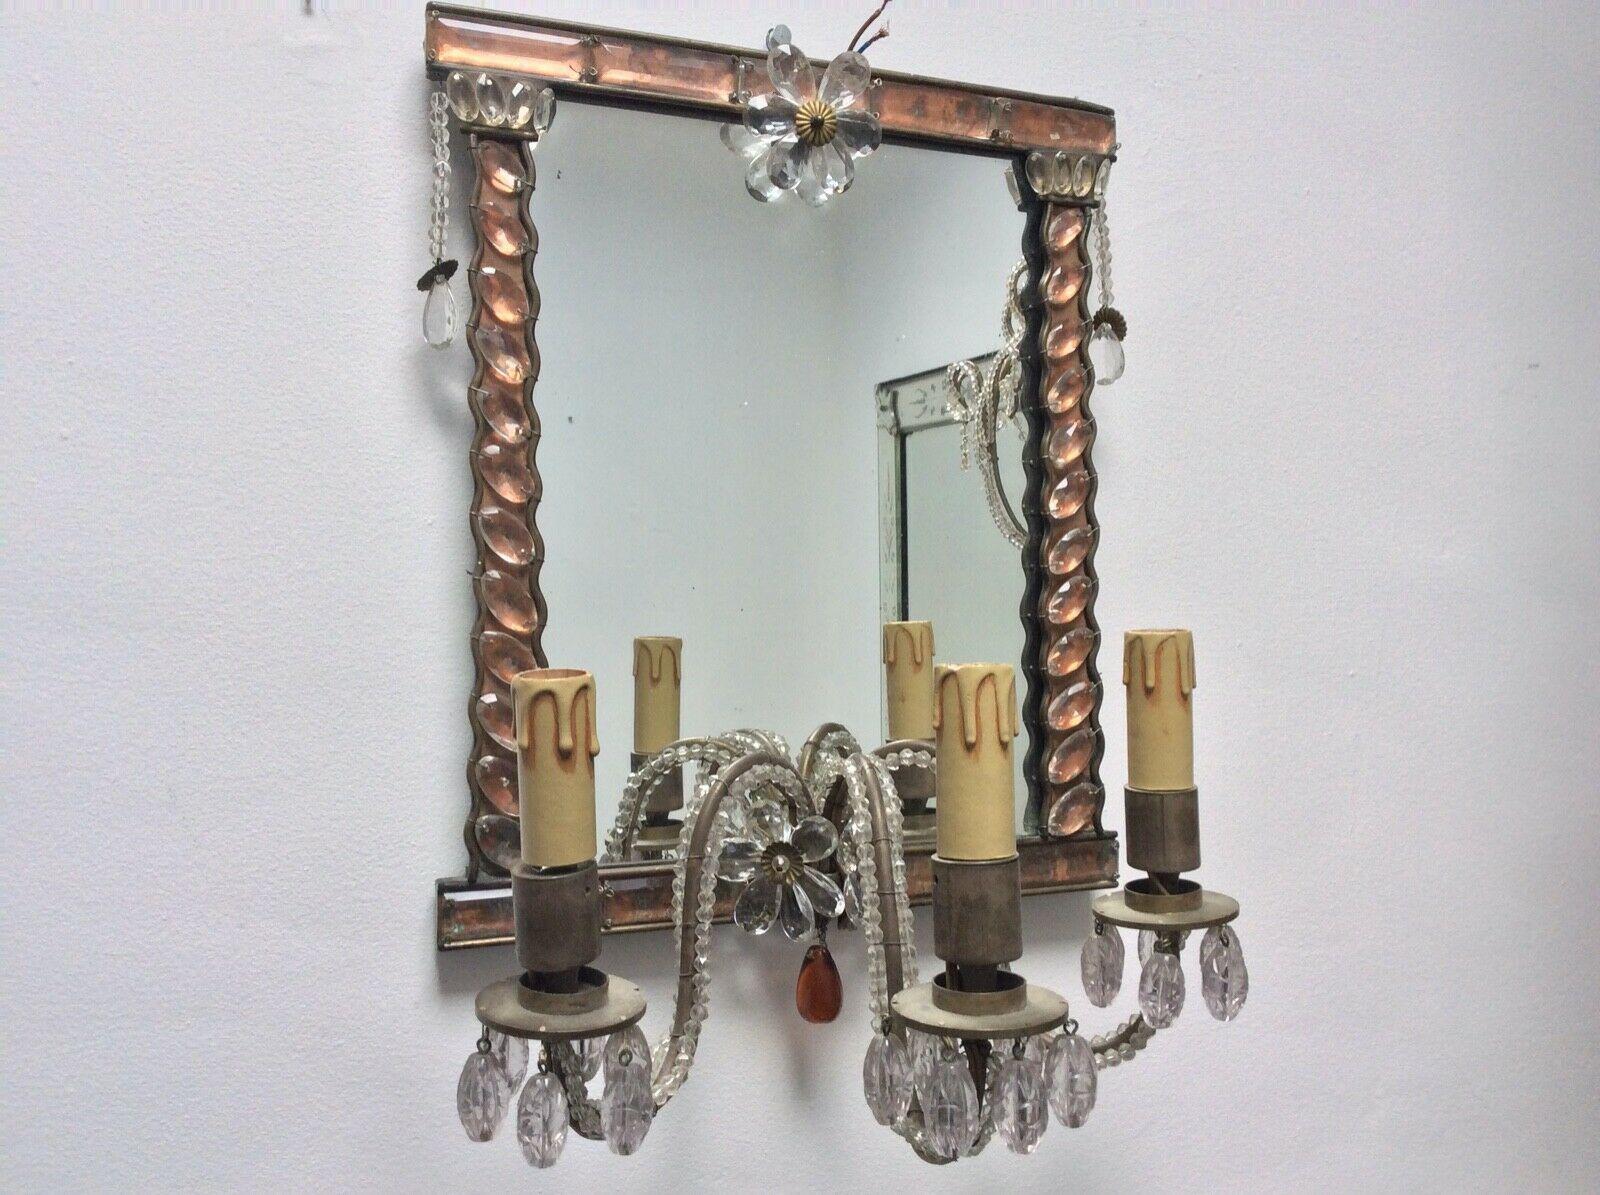 Rare 1920s French Art Deco Crystal Maison Bagues Wall Mirror Sconce / Wall Lamp For Sale 3